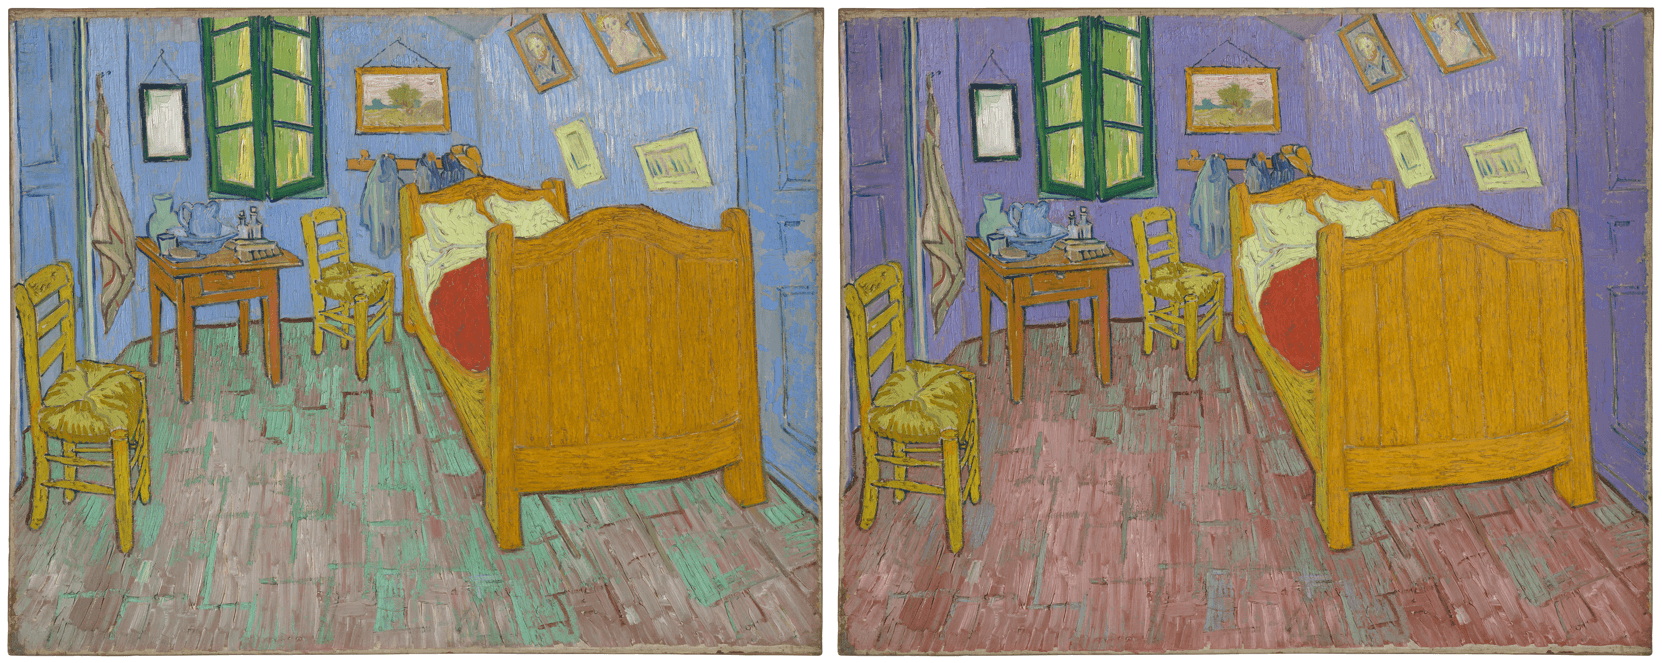 On the left, The Bedroom as seen in real life. On the right, a digital recolorized visualization.